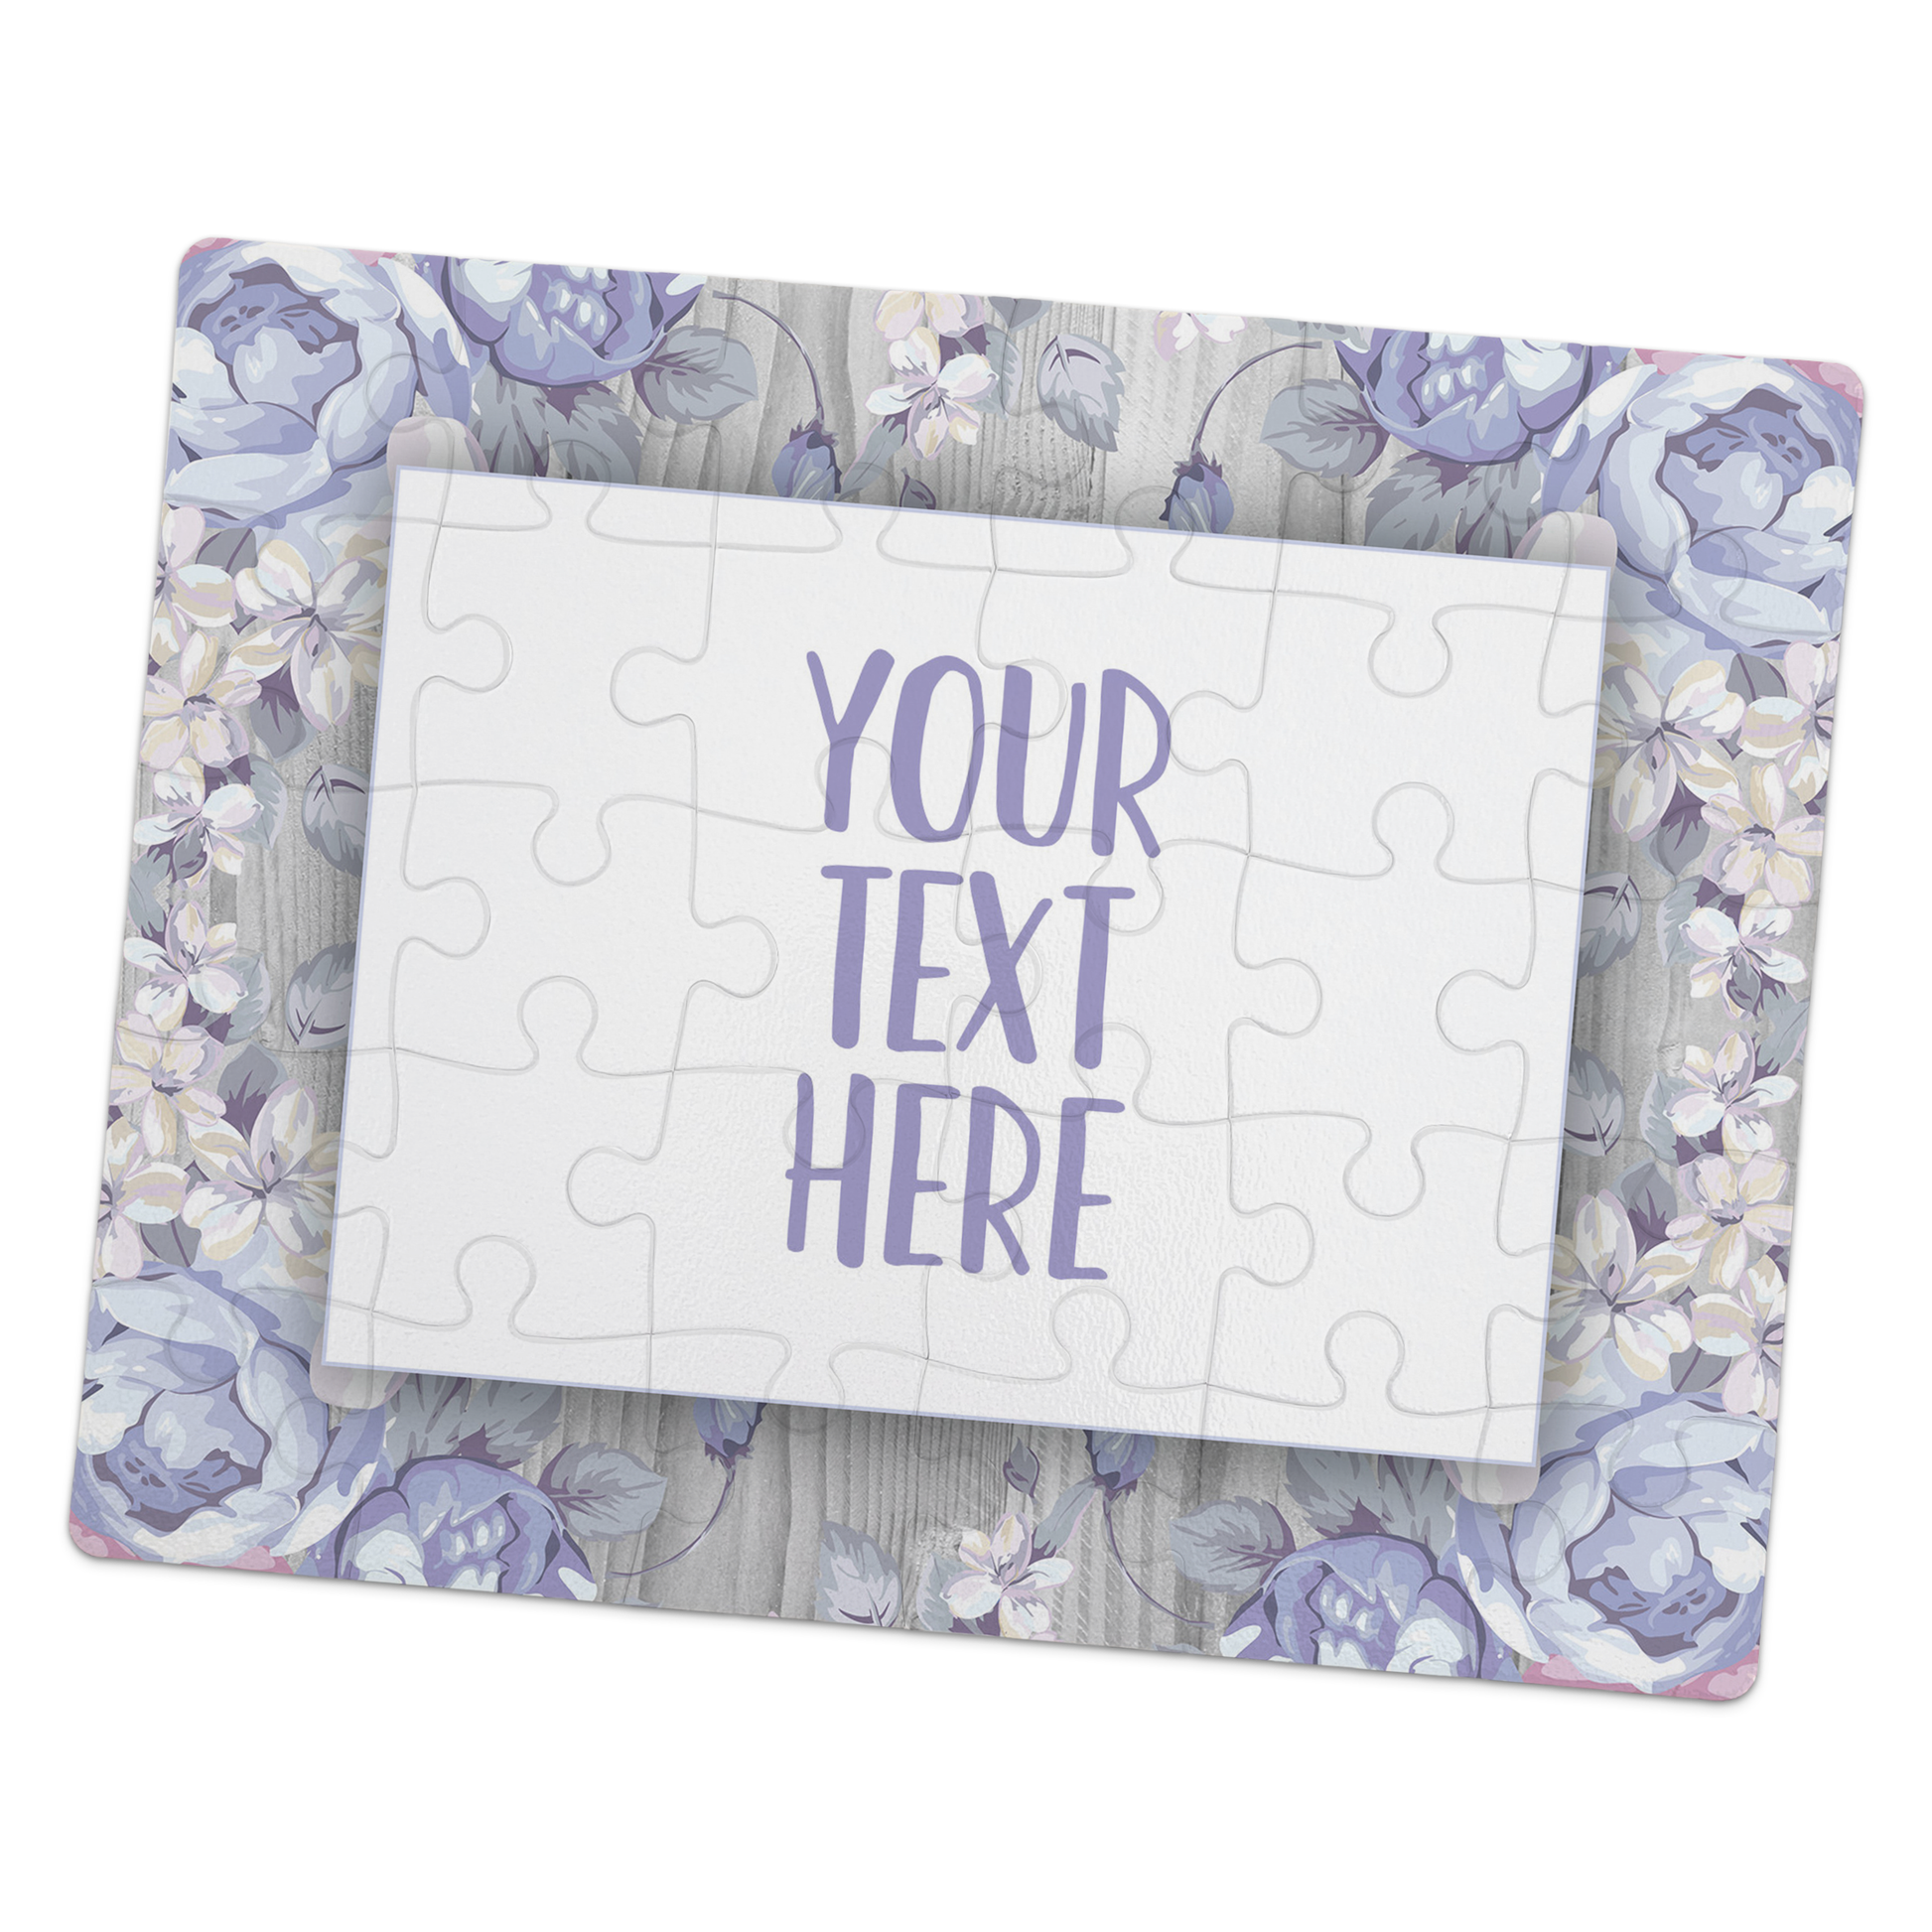 Create Your Own Puzzle - Floral Design - CYOP0060